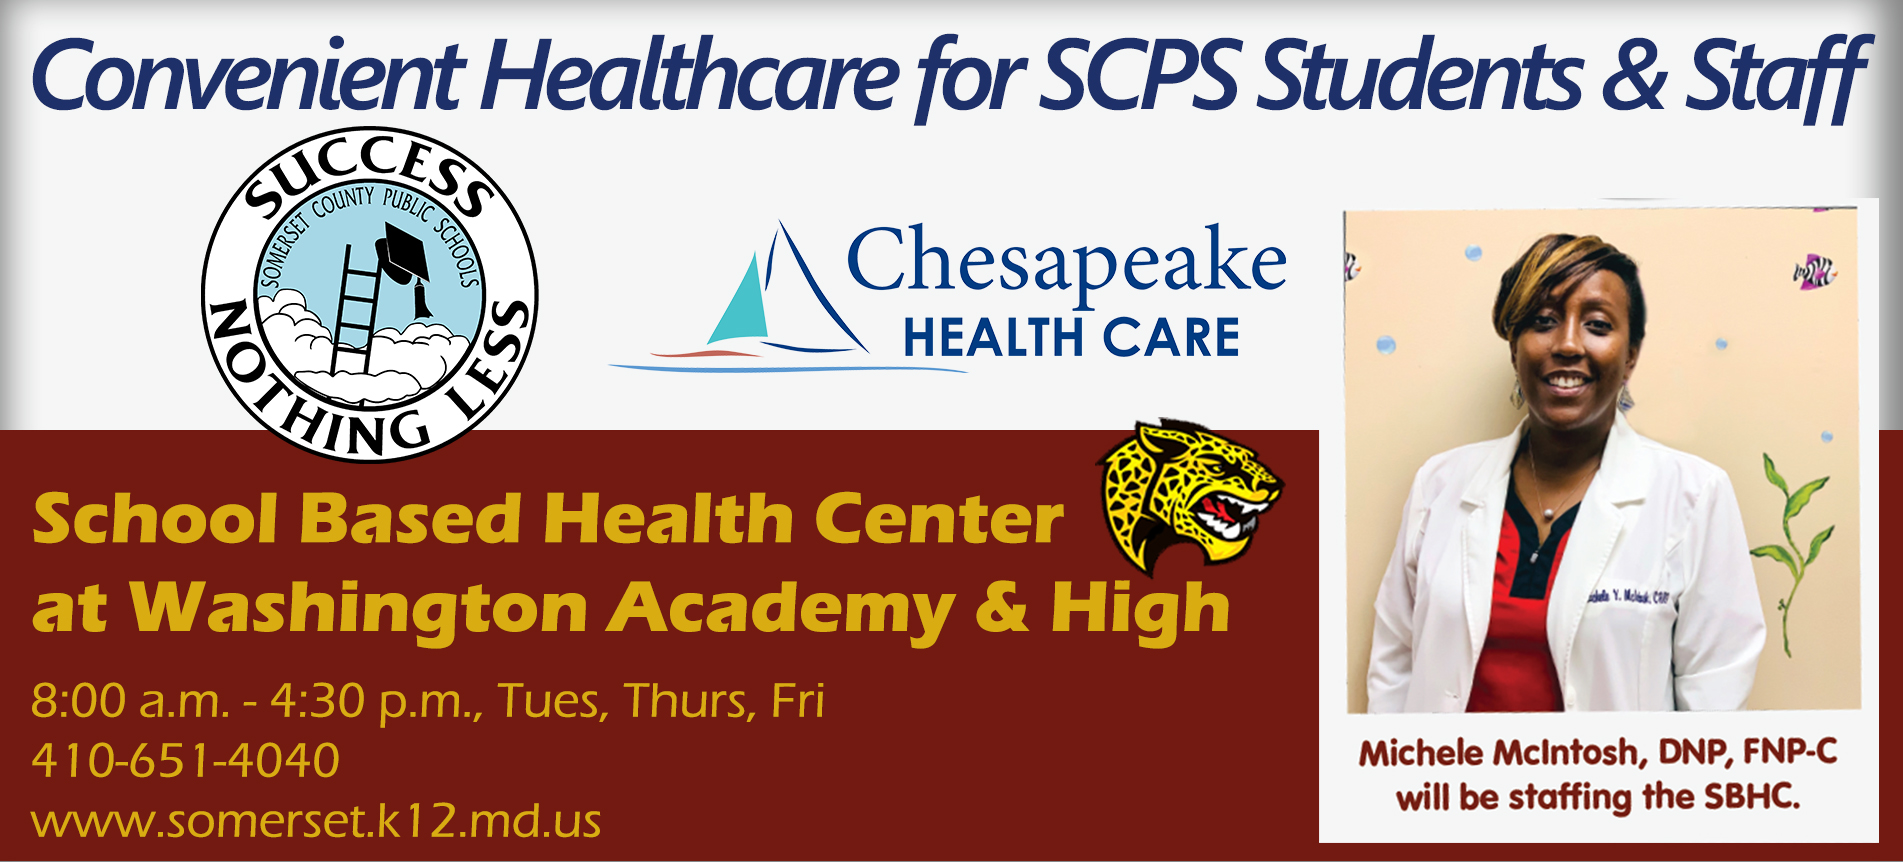 Convenient Healthcare for SCPS Students & Staff SCPS Logo Chesapeake Healthcare Logo WAHS logo School Based Health Center at Washington Academy & High8:00 a.m. - 4:30 p.m., Tues, Thurs, Fri 410-651-4040 www.somerset.k12.md.us photo of a smiling woman with short brown hair in a medical/lab coat with text below that says "michele mcintosh, dnp, FNP-C will be staffing the SBHC